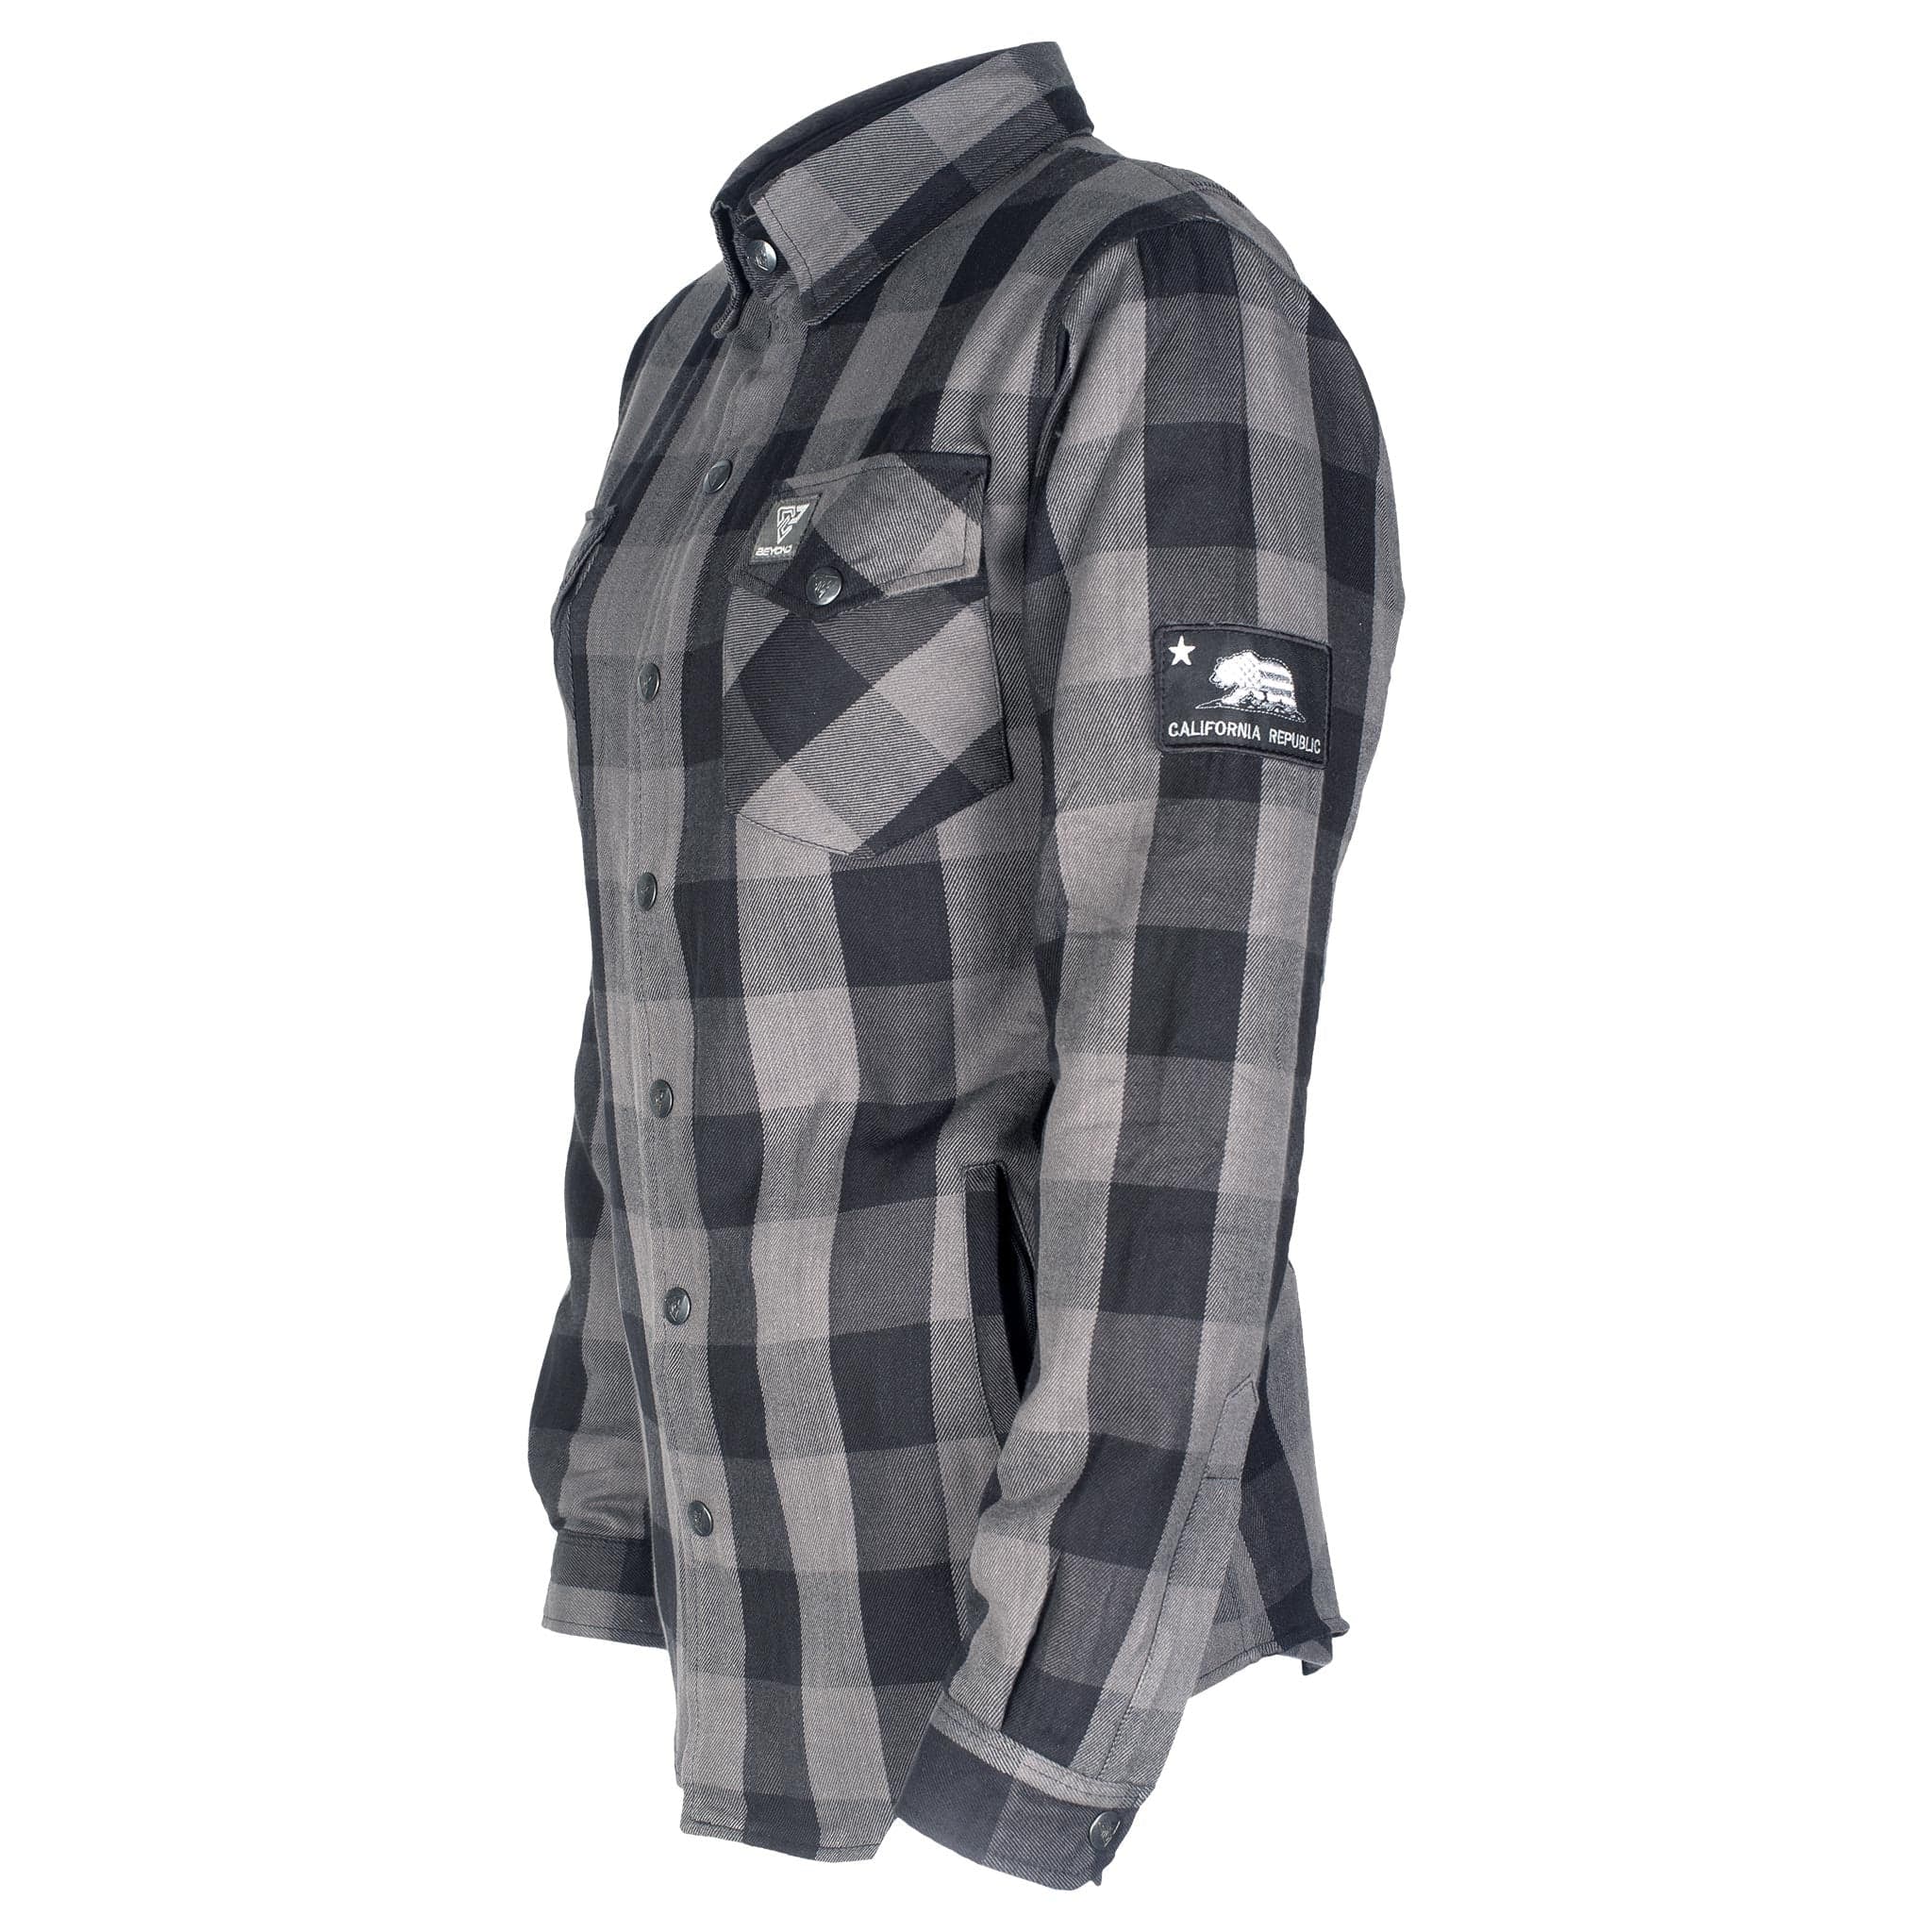 Protective Flannel Shirt for Women - Grey Checkered